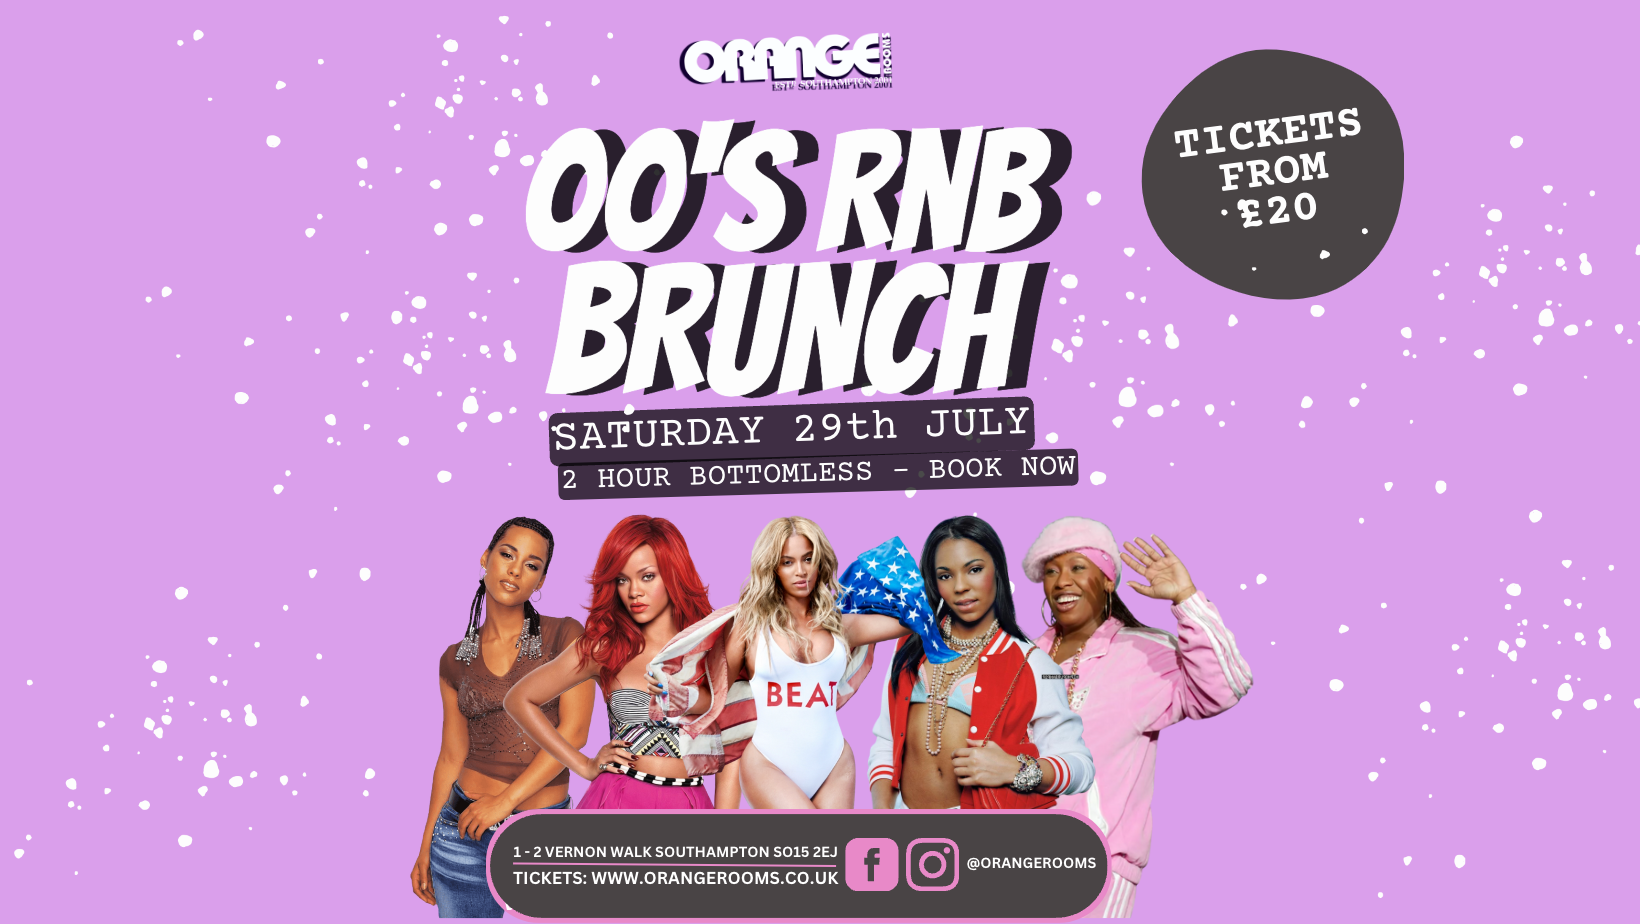 00's RnB Bottomless Brunch Saturday 29th July! Orange Rooms